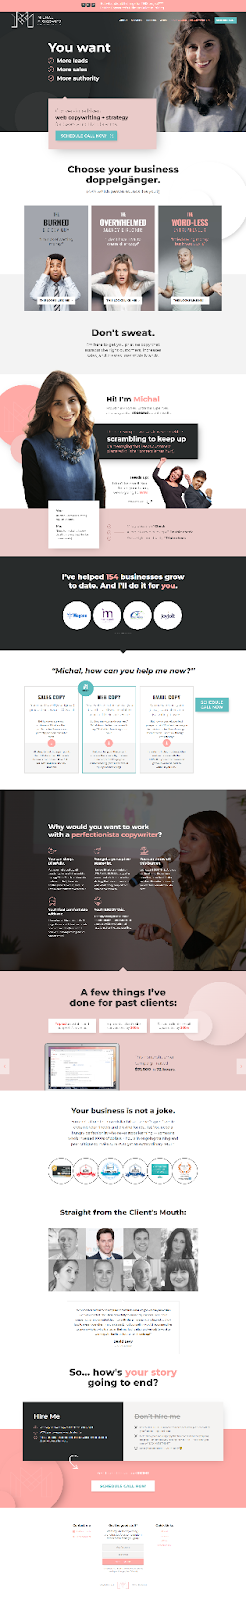 Product landing page example Michal Eisikowitz